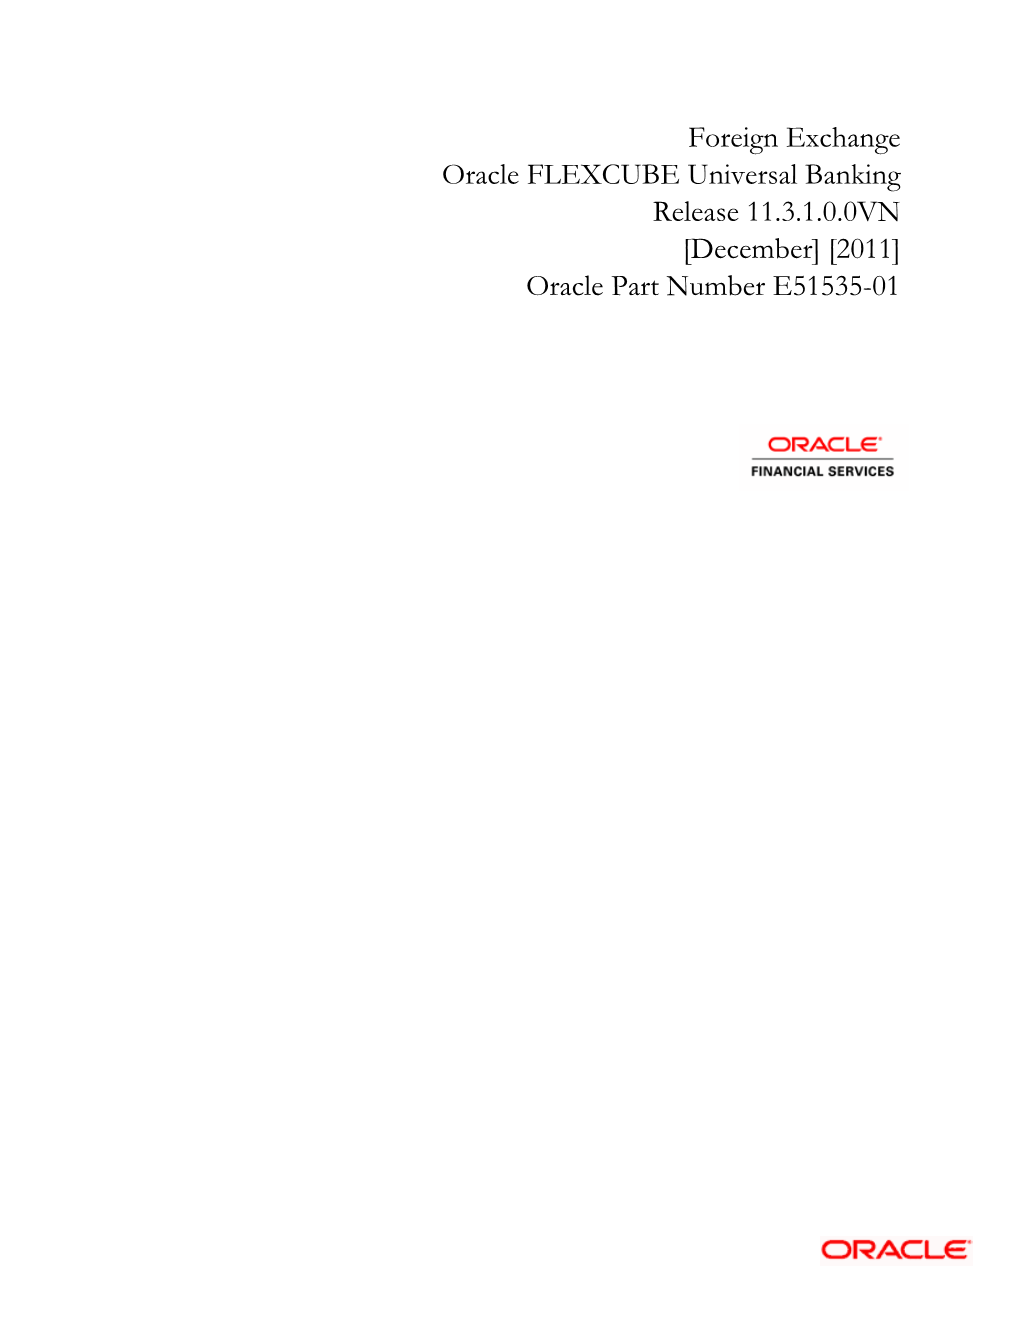 Foreign Exchange Oracle FLEXCUBE Universal Banking Release 11.3.1.0.0VN [December] [2011] Oracle Part Number E51535-01